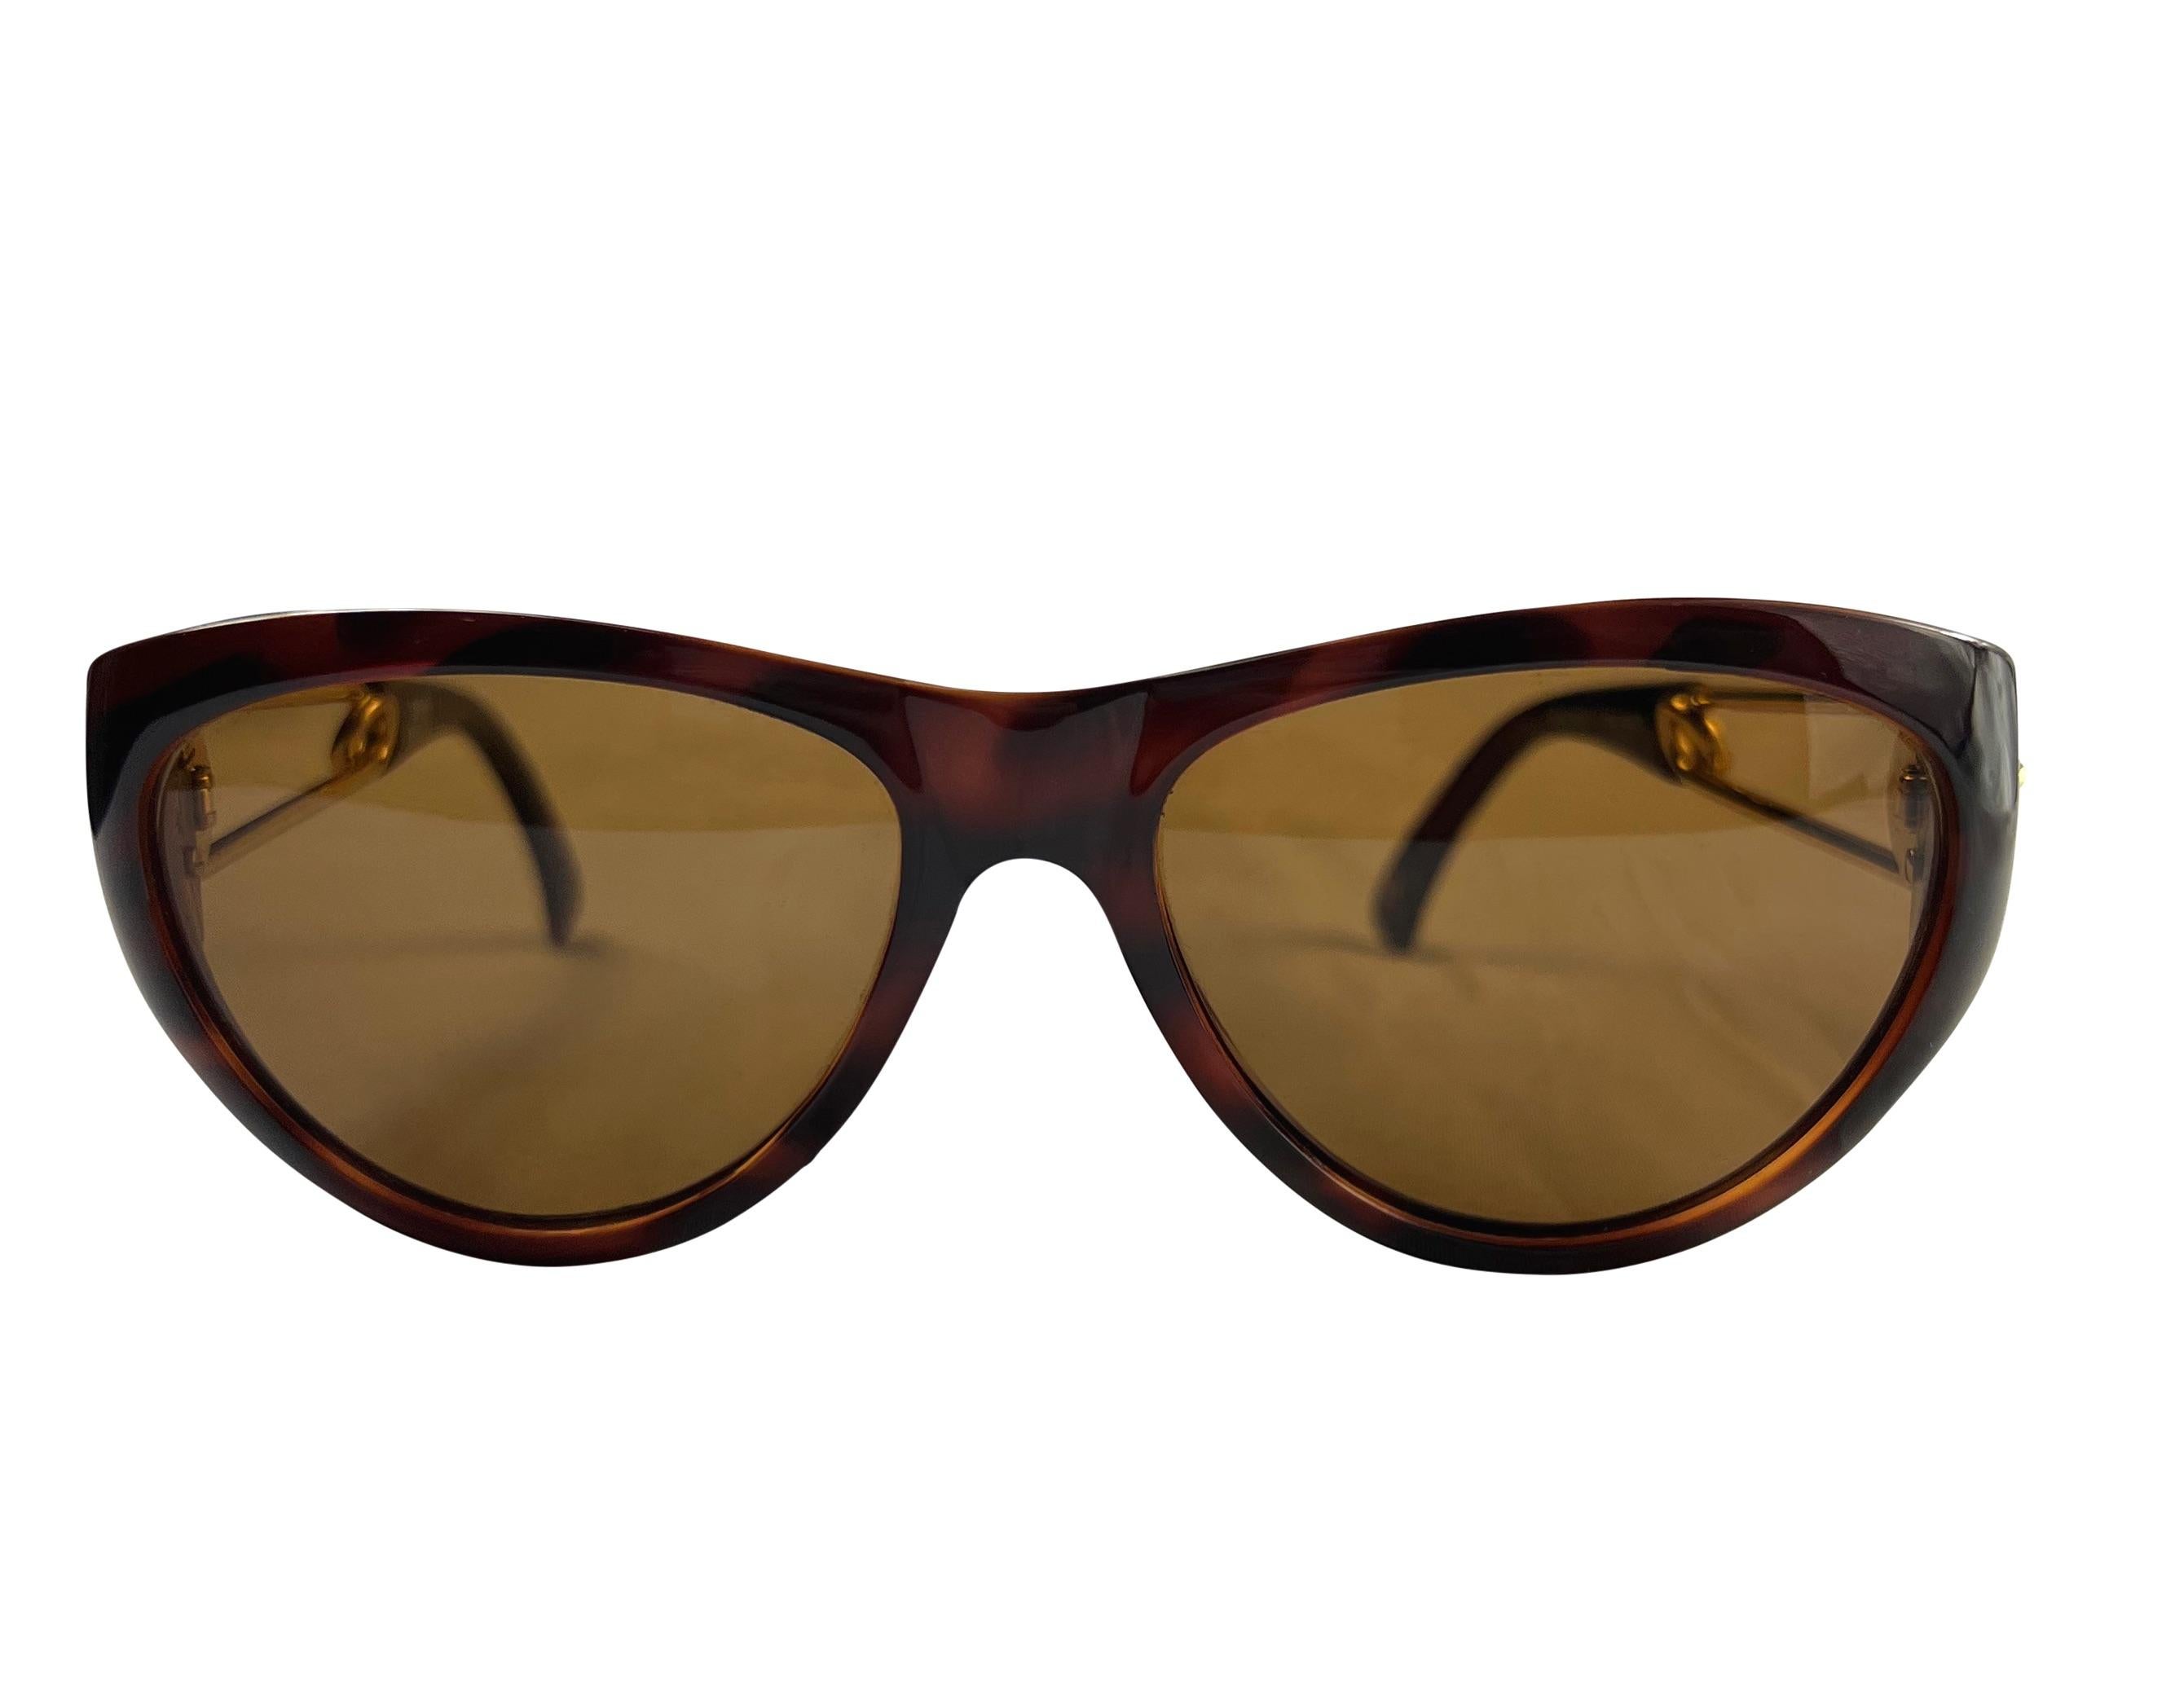 Presenting a pair of incredible brown and gold-tone Gianni Versace sunglasses, designed by Gianni Versace. From the Spring/Summer 1994 collection, these sunglasses feature a subtle cat eye design and the brand's infamous Medusa safety pin design at